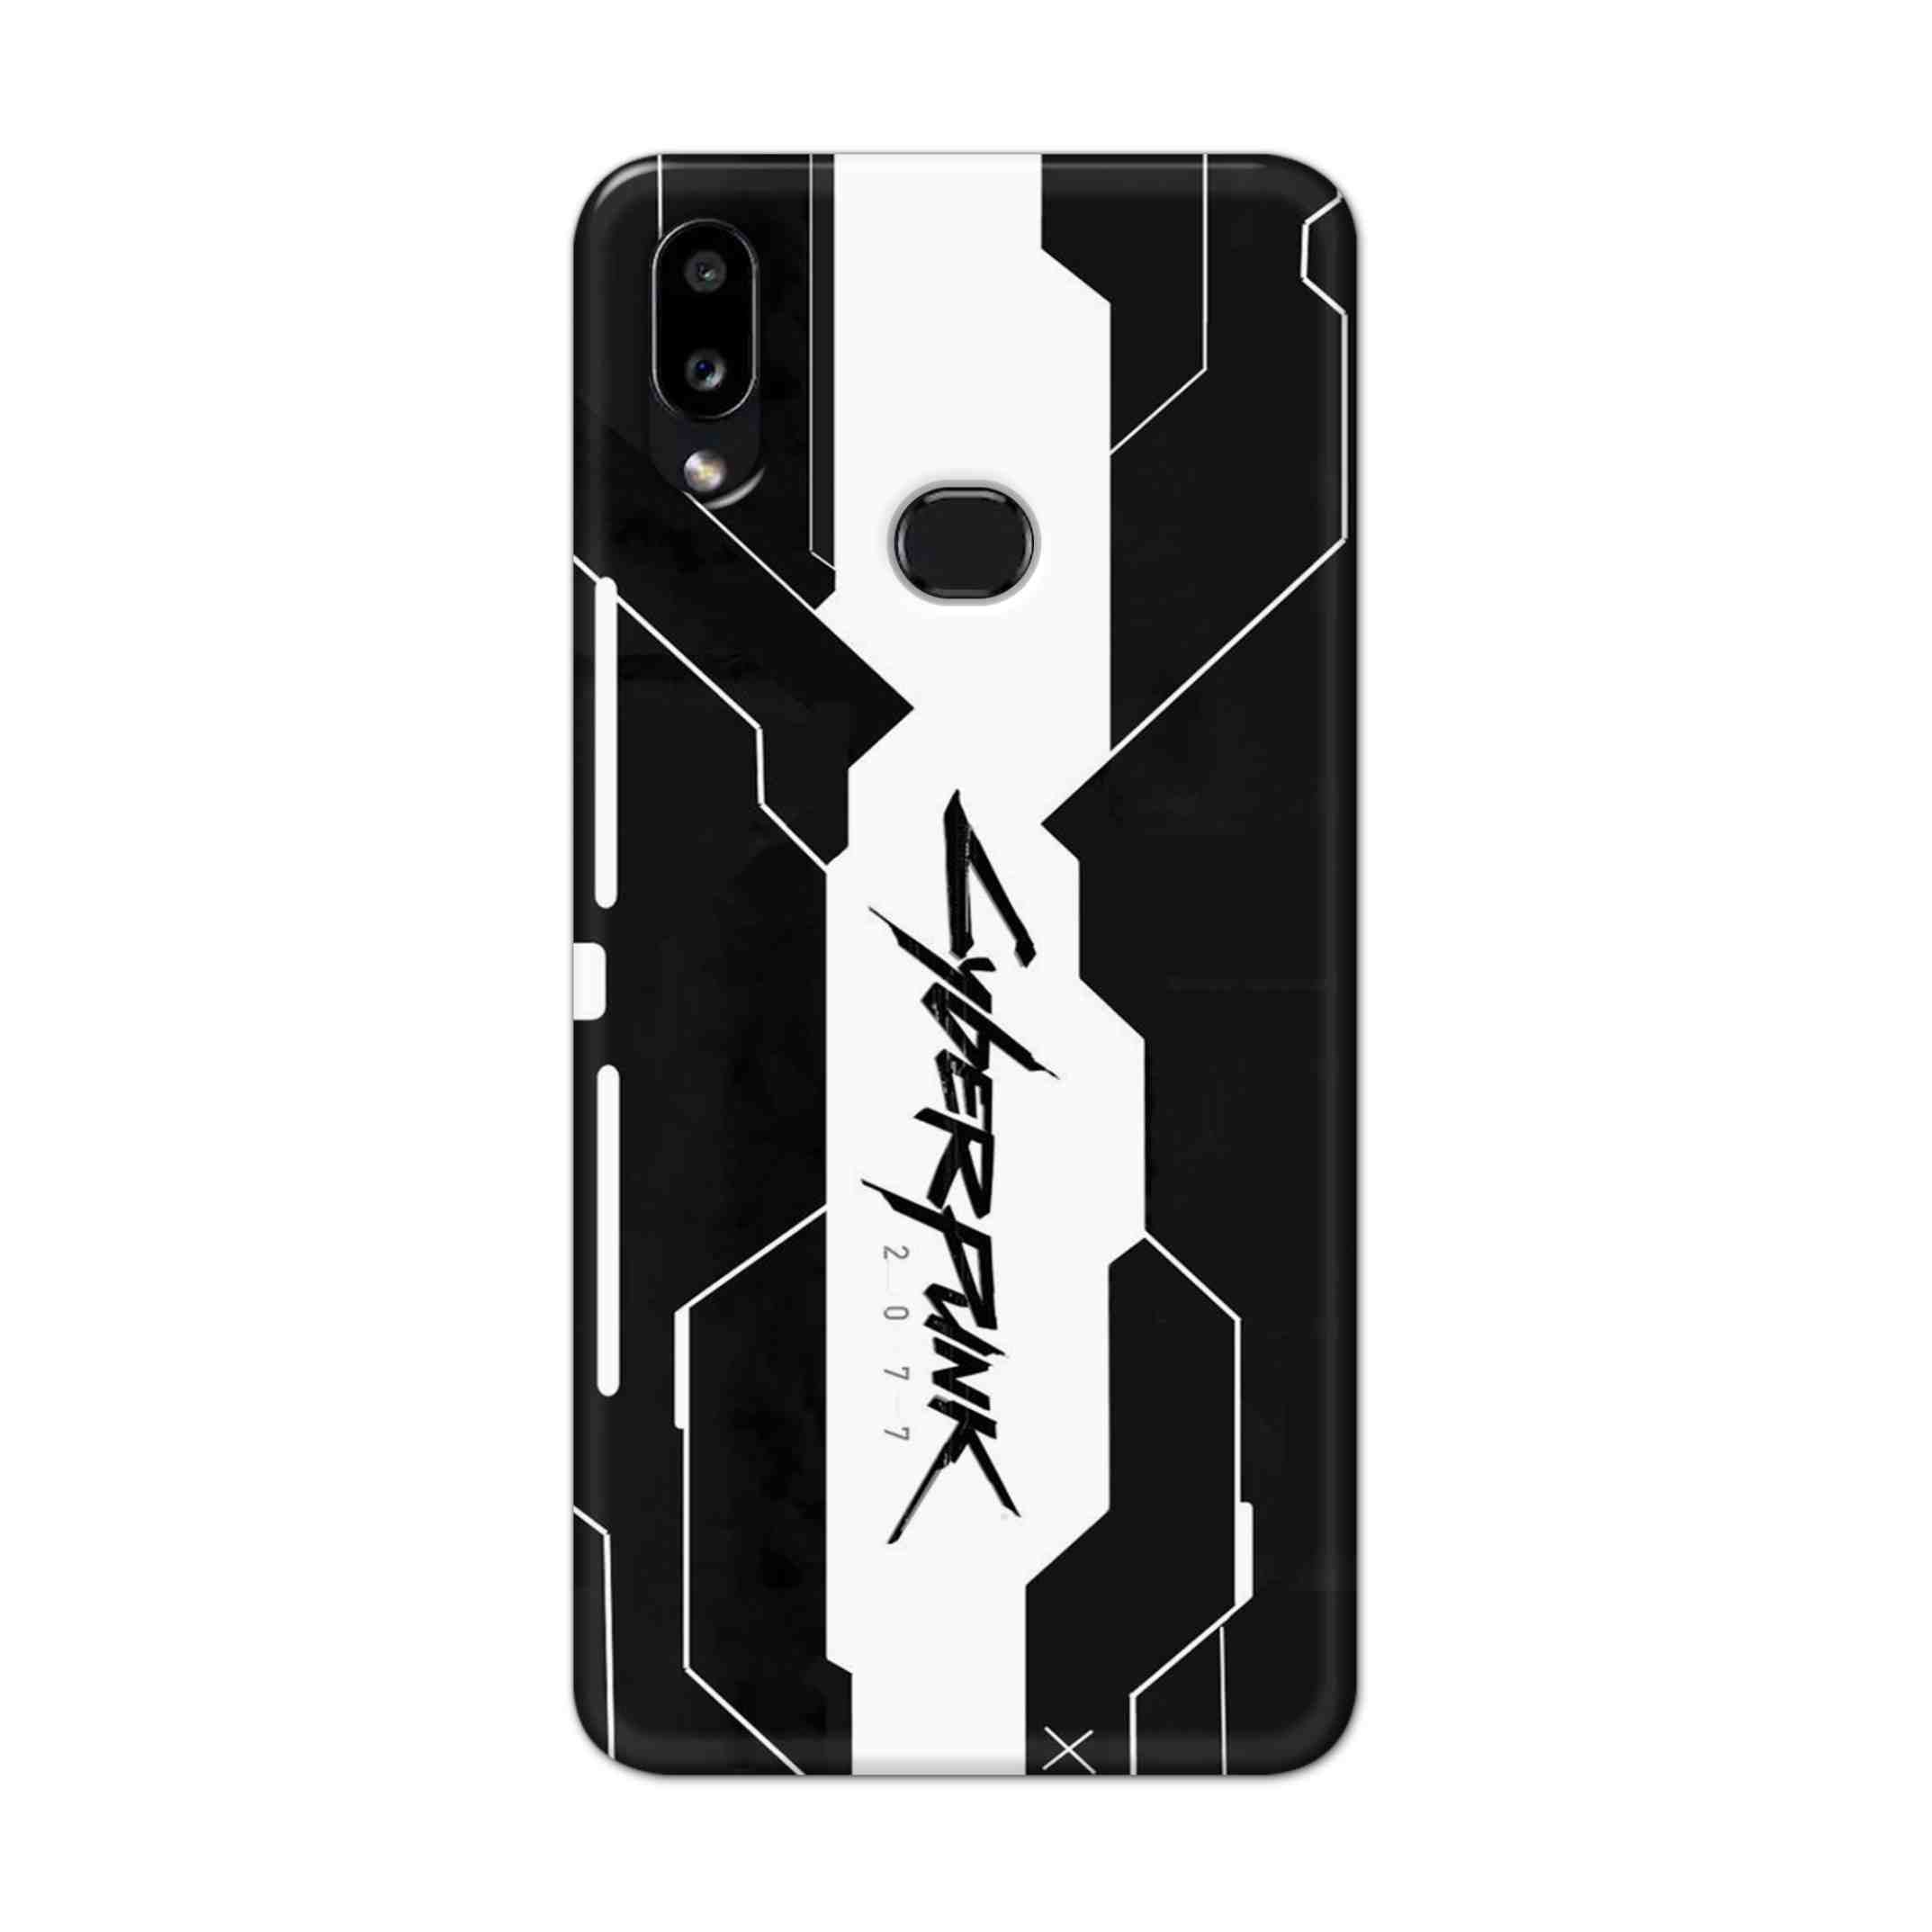 Buy Cyberpunk 2077 Art Hard Back Mobile Phone Case Cover For Samsung Galaxy M01s Online